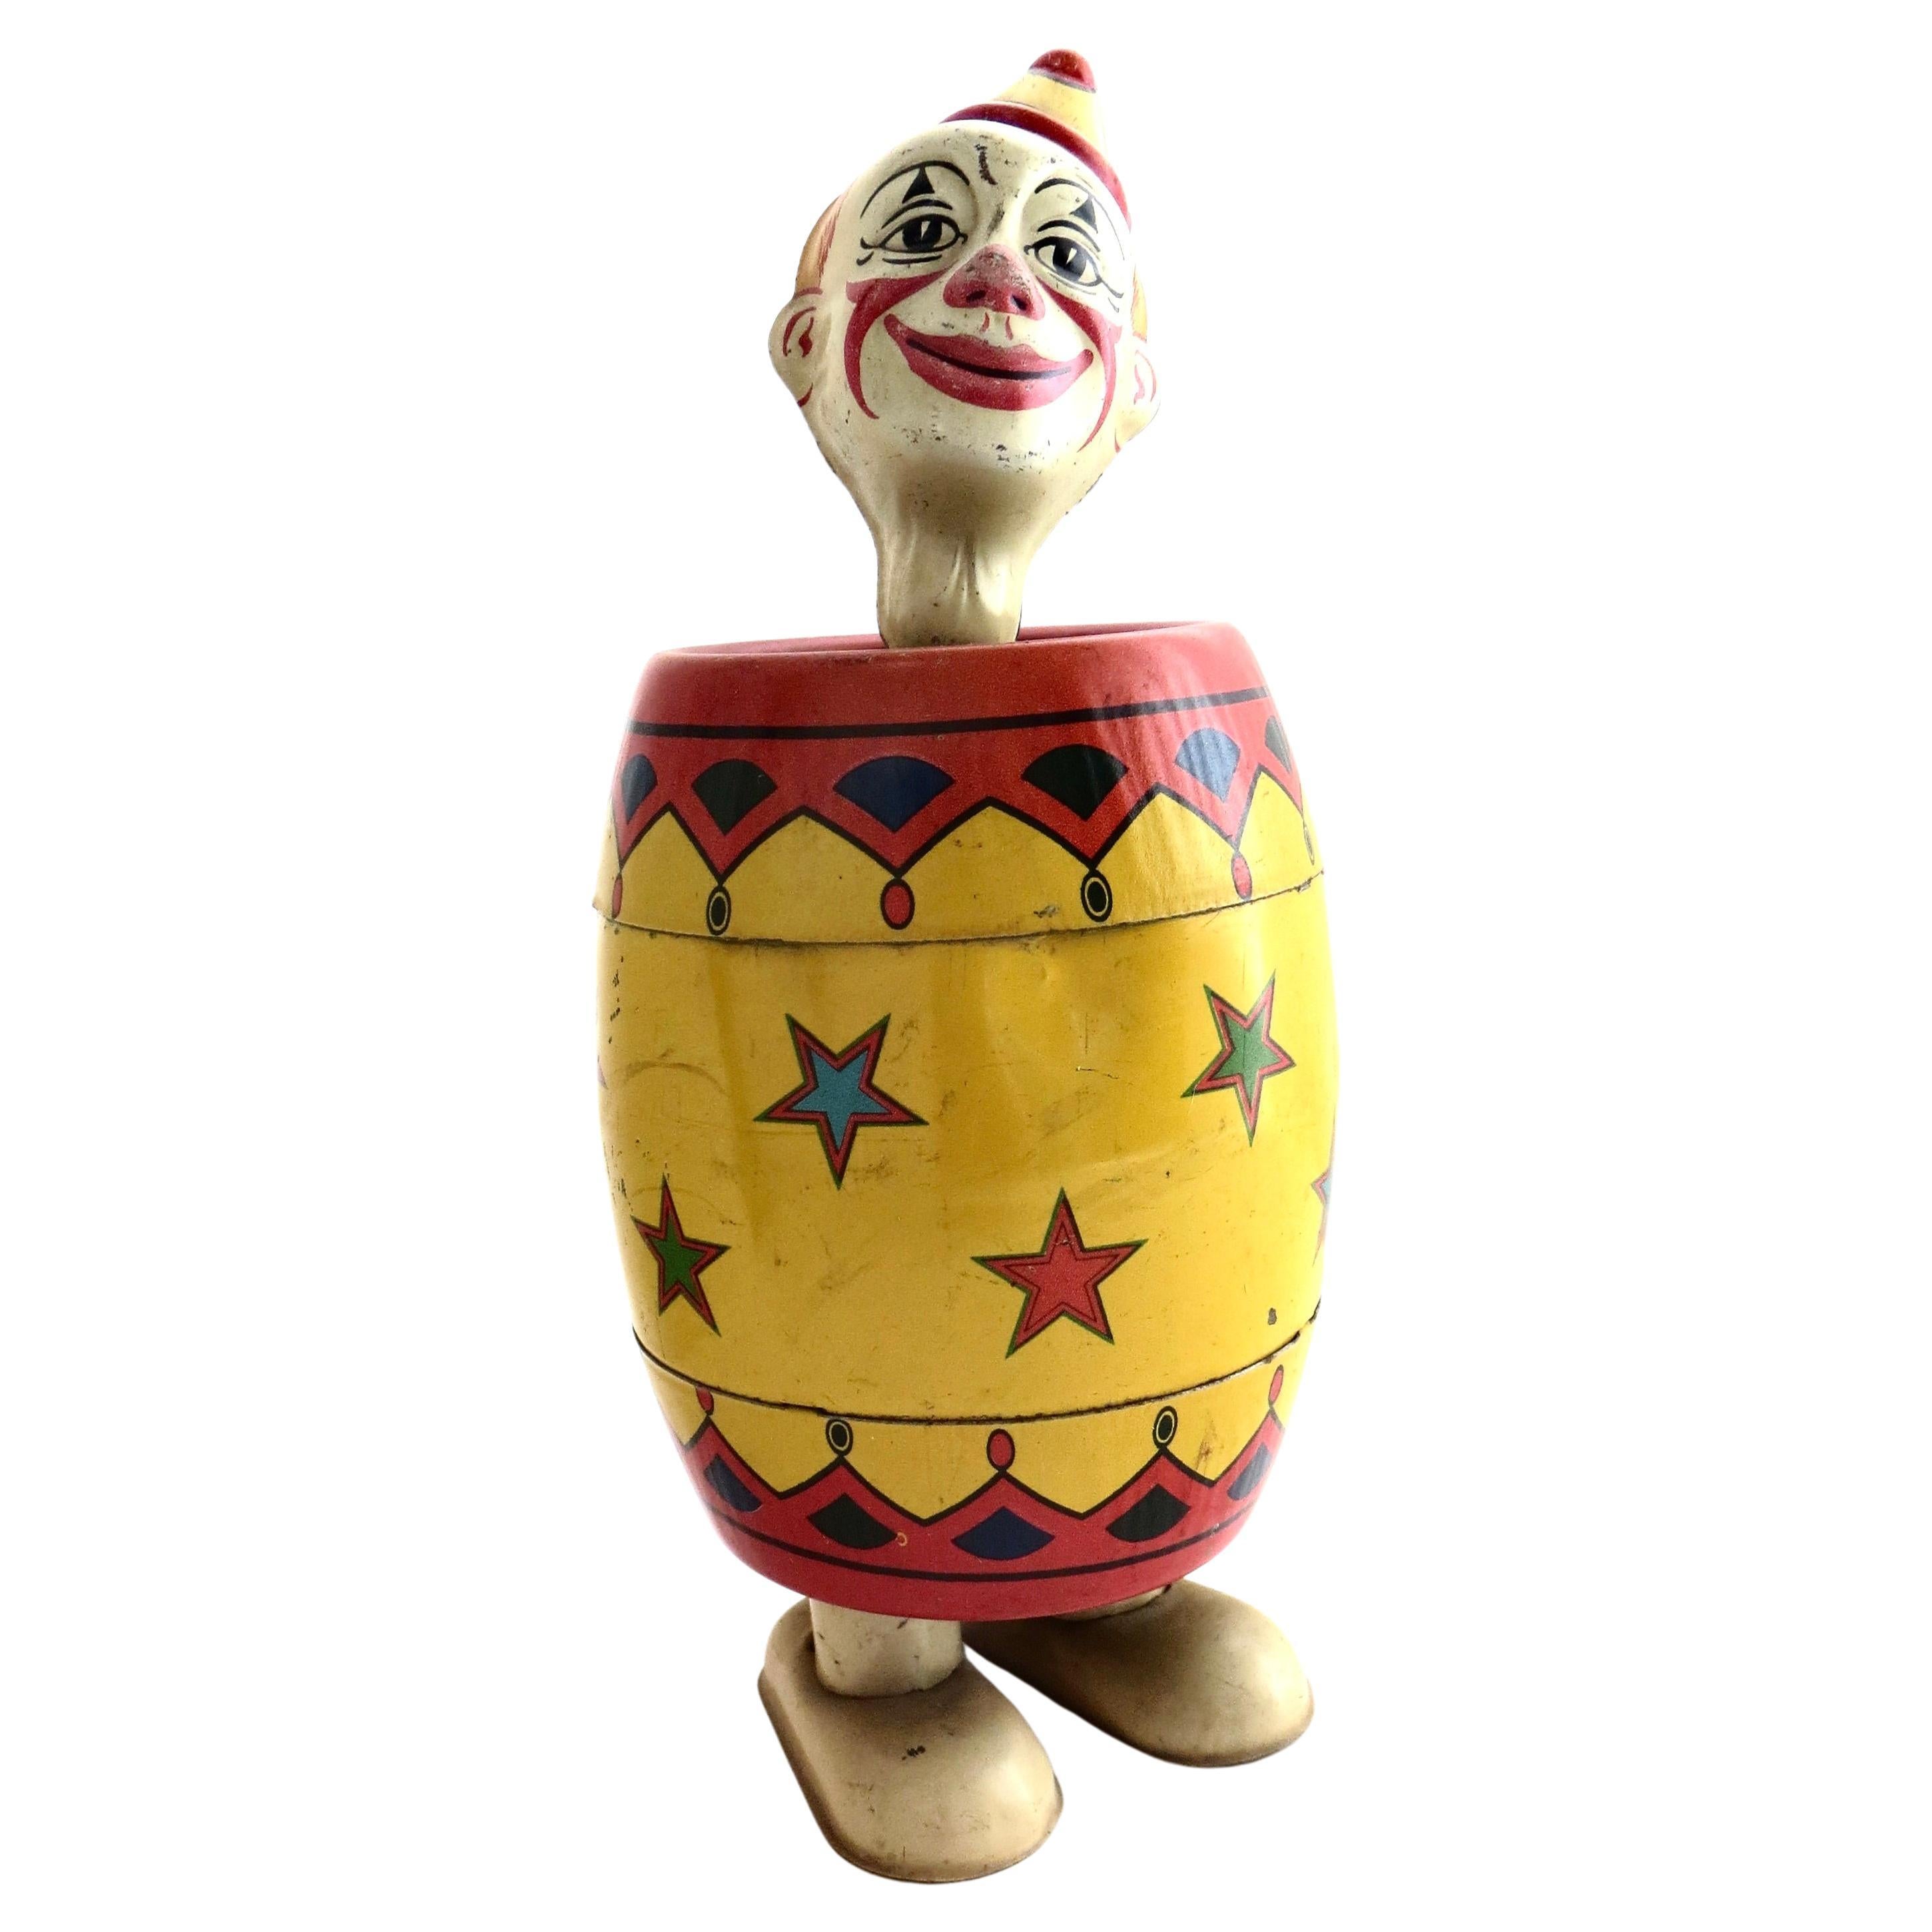 Vintage Tin Wind-up Toy "Clown in A Barrel" by J Chein & Co. American Circa 1935